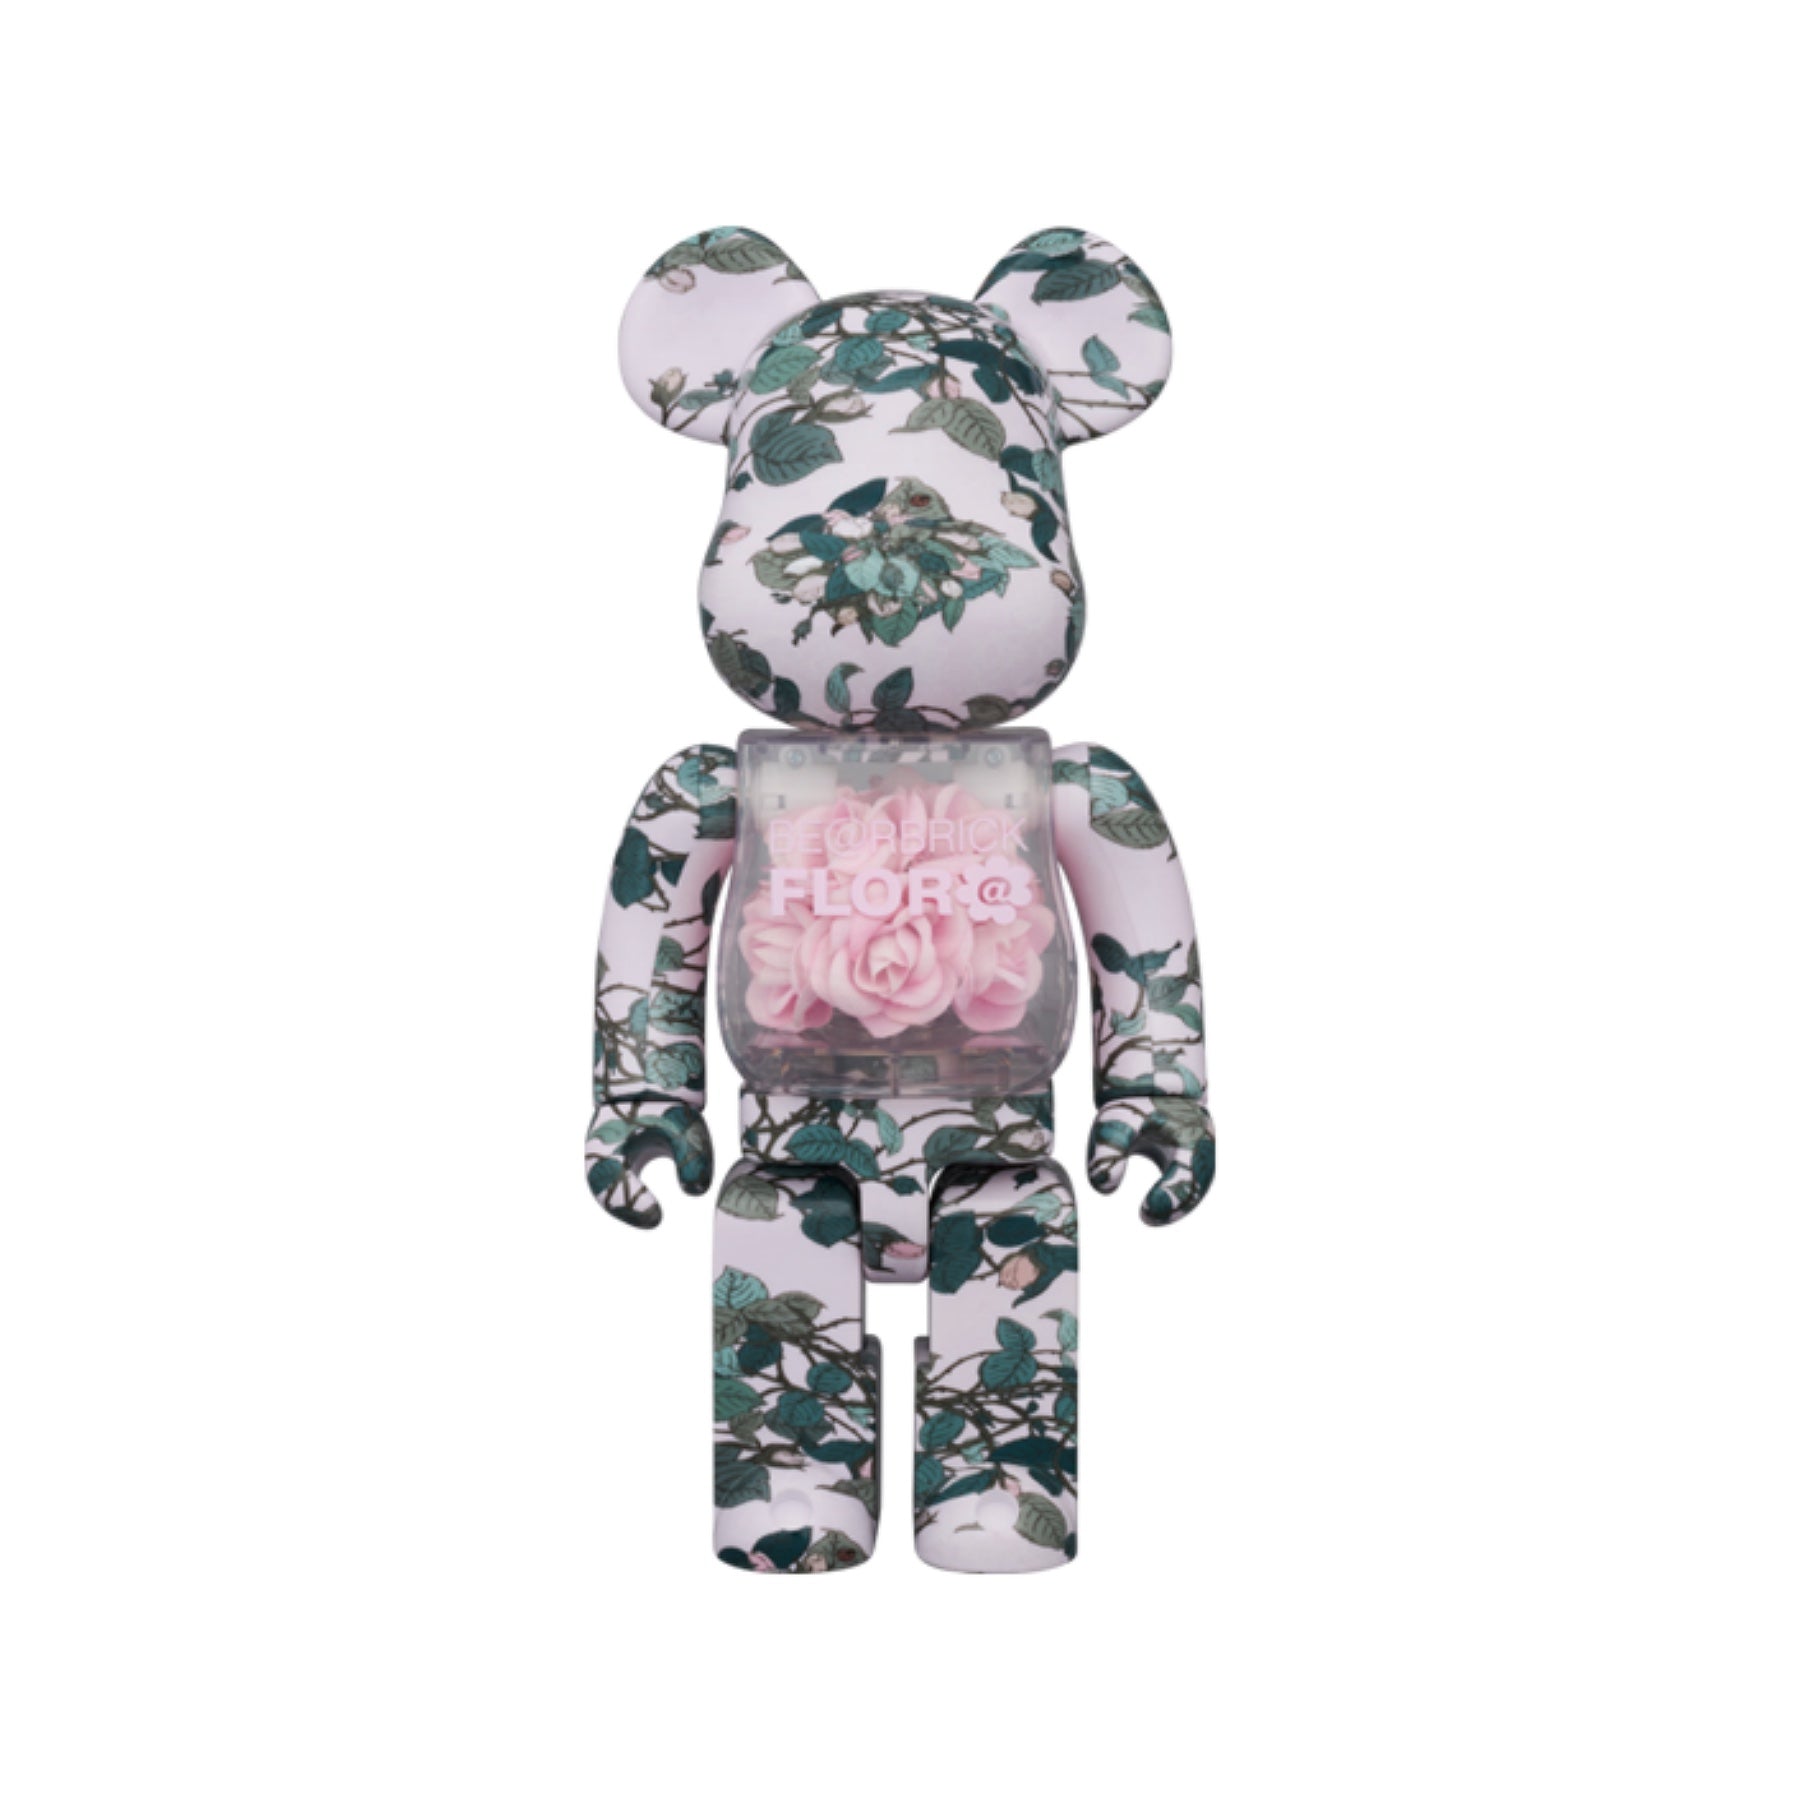 400% BE@RBRICK FLOR@ PINK ROSE – Madmaxtoys